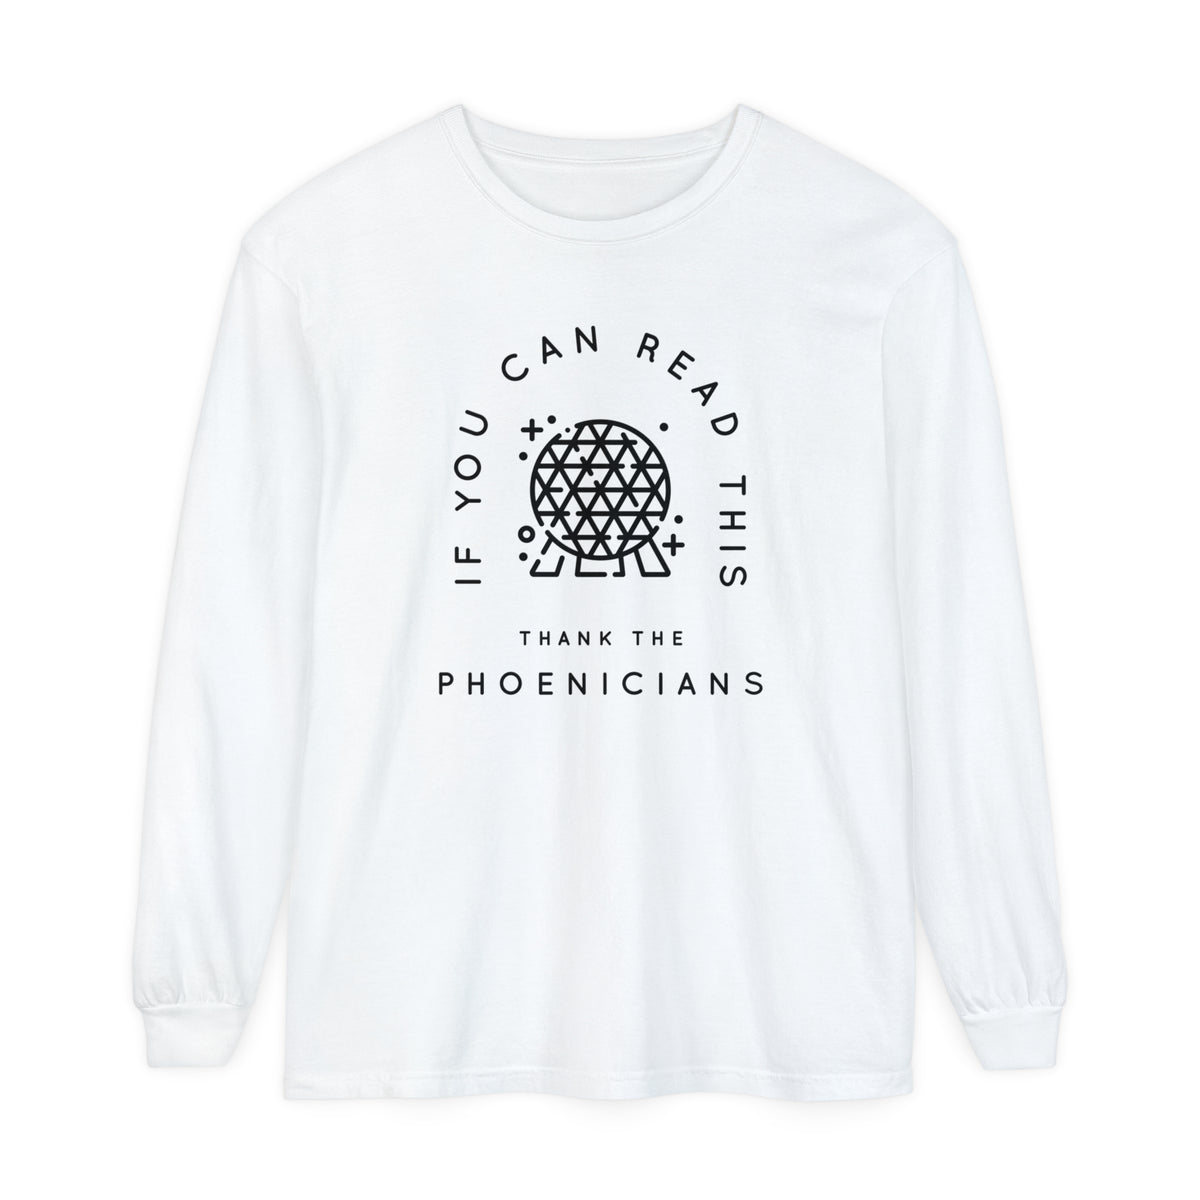 If You Can Read This Thank The Phoenicians Comfort Colors Unisex Garment-dyed Long Sleeve T-Shirt